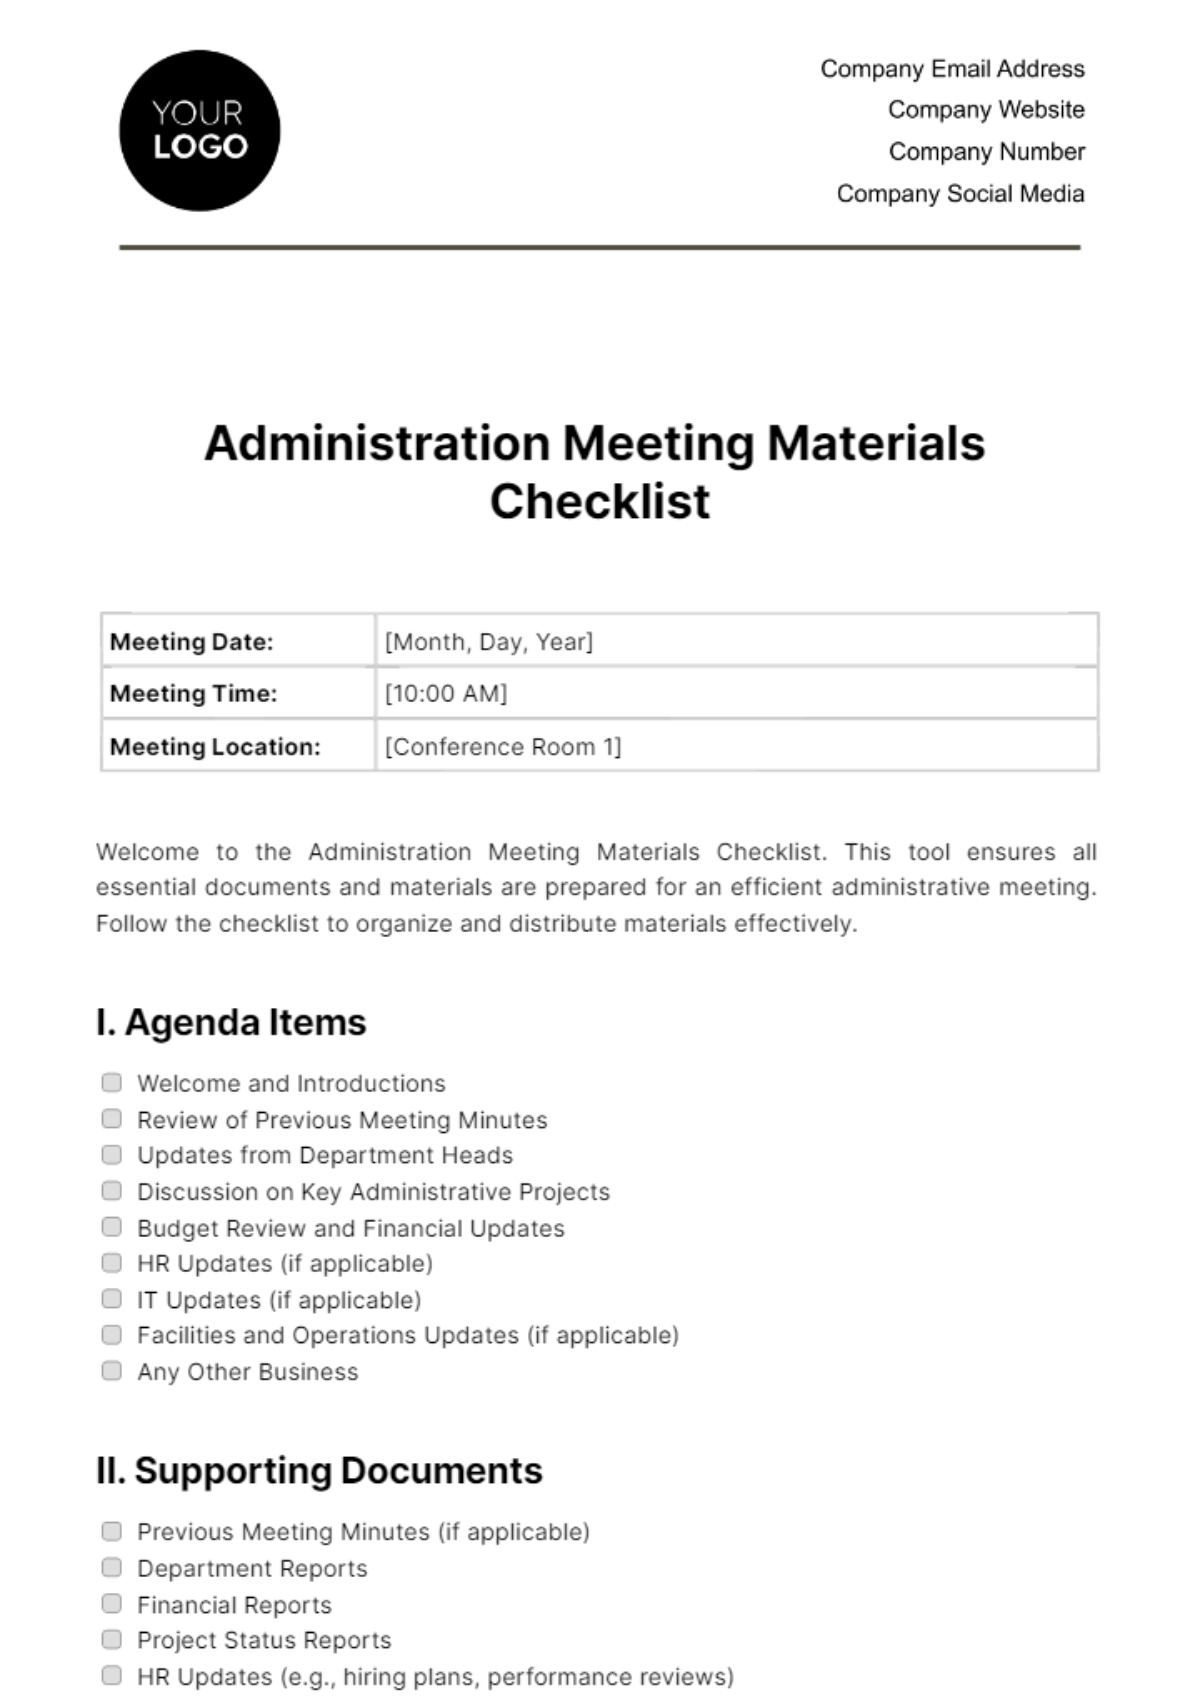 Administration Meeting Materials Checklist Template